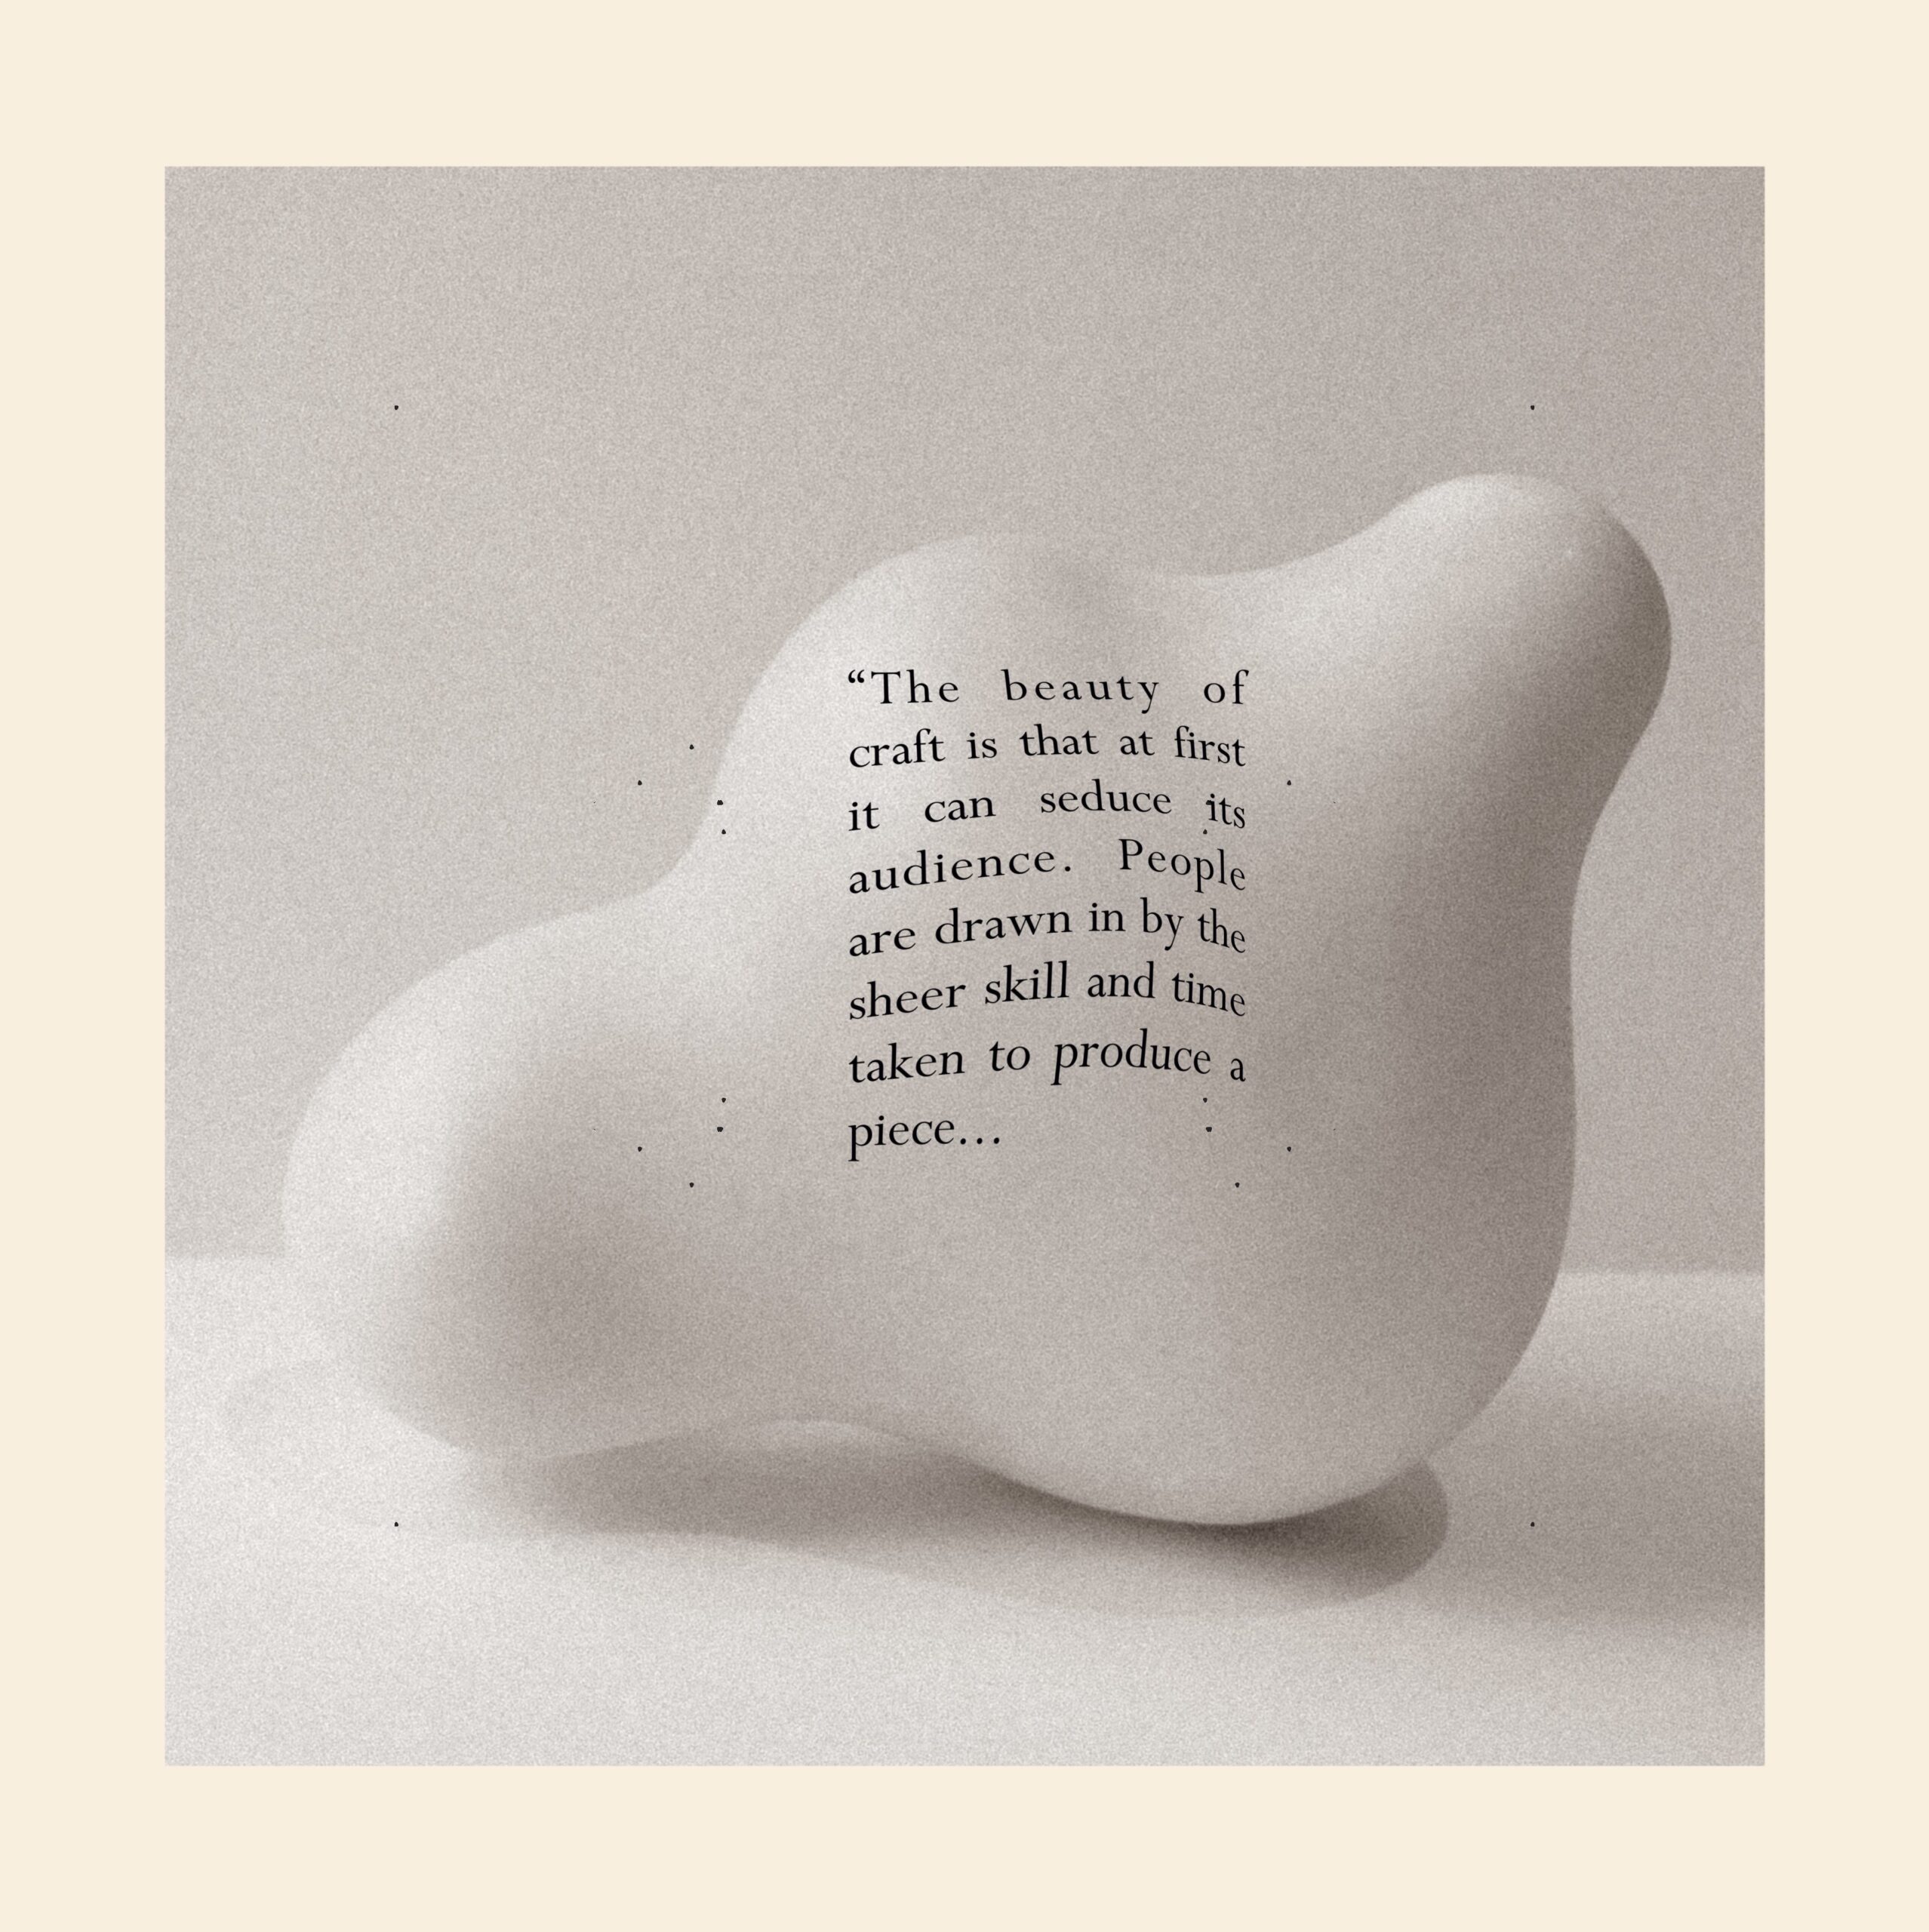 Clay objects with text on it